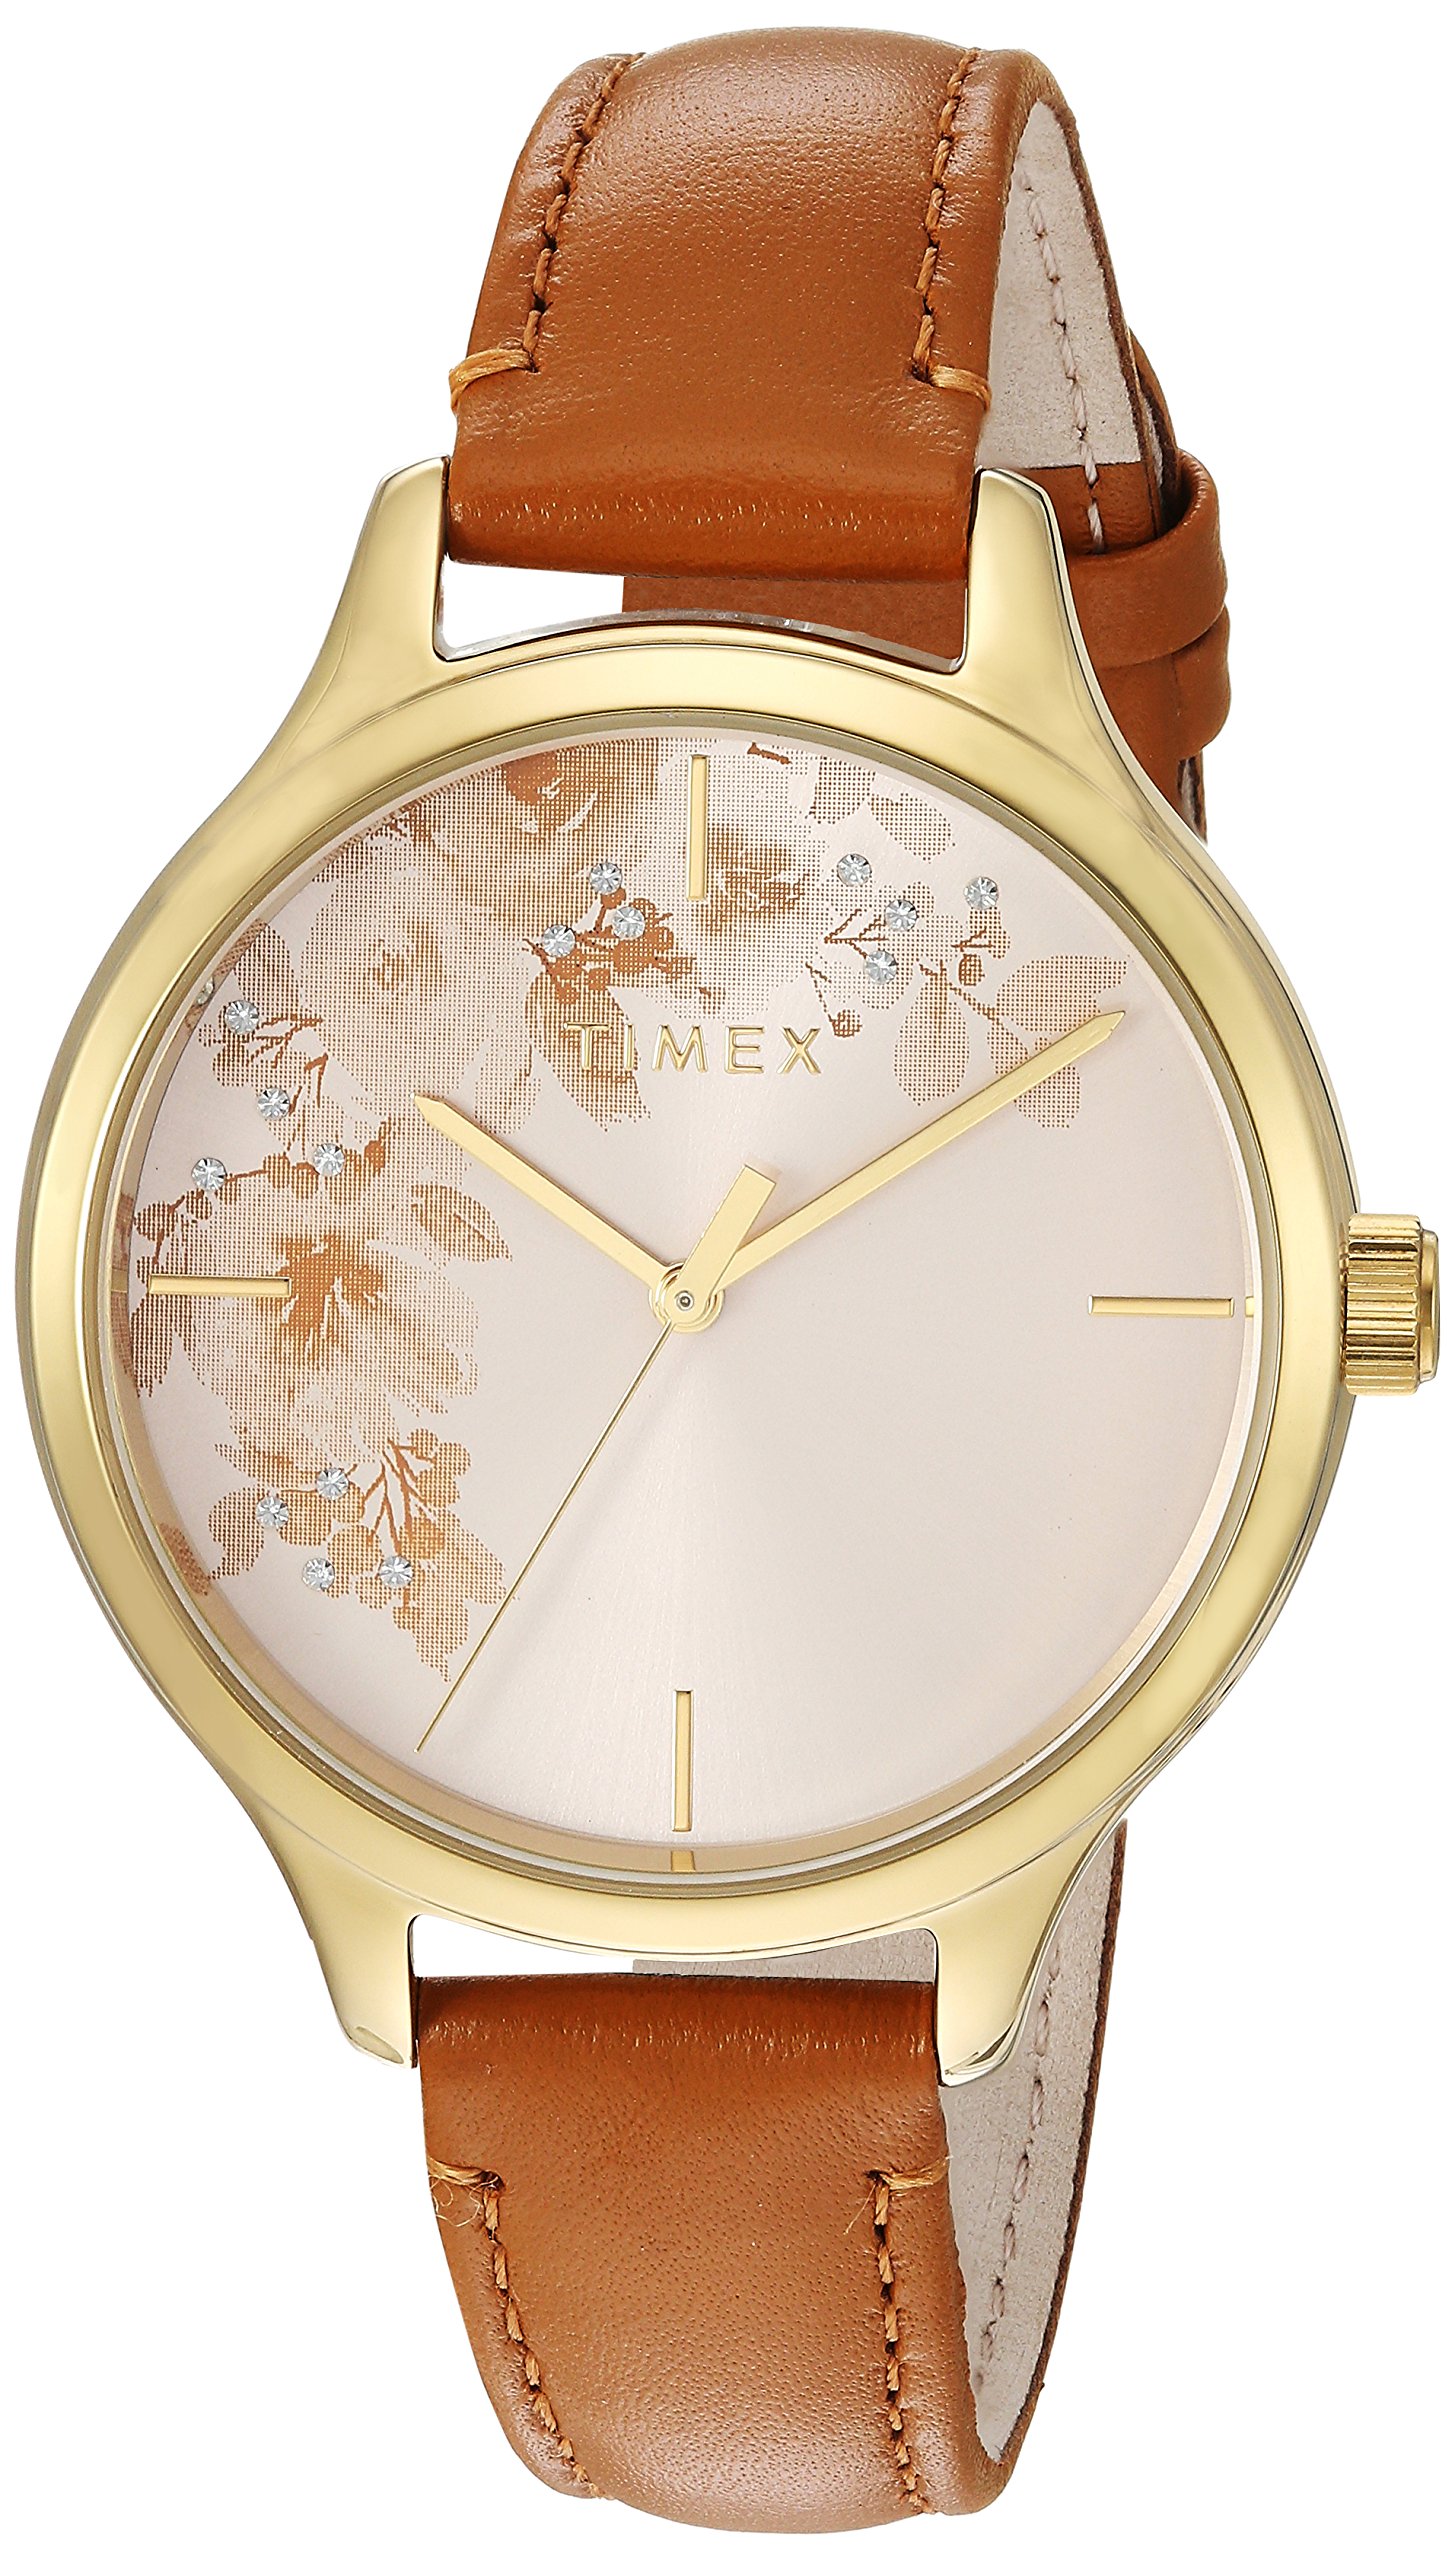 Timex Womens Crystal Bloom Tan/Gold Floral Accent Leather Strap Watch TW2R66900